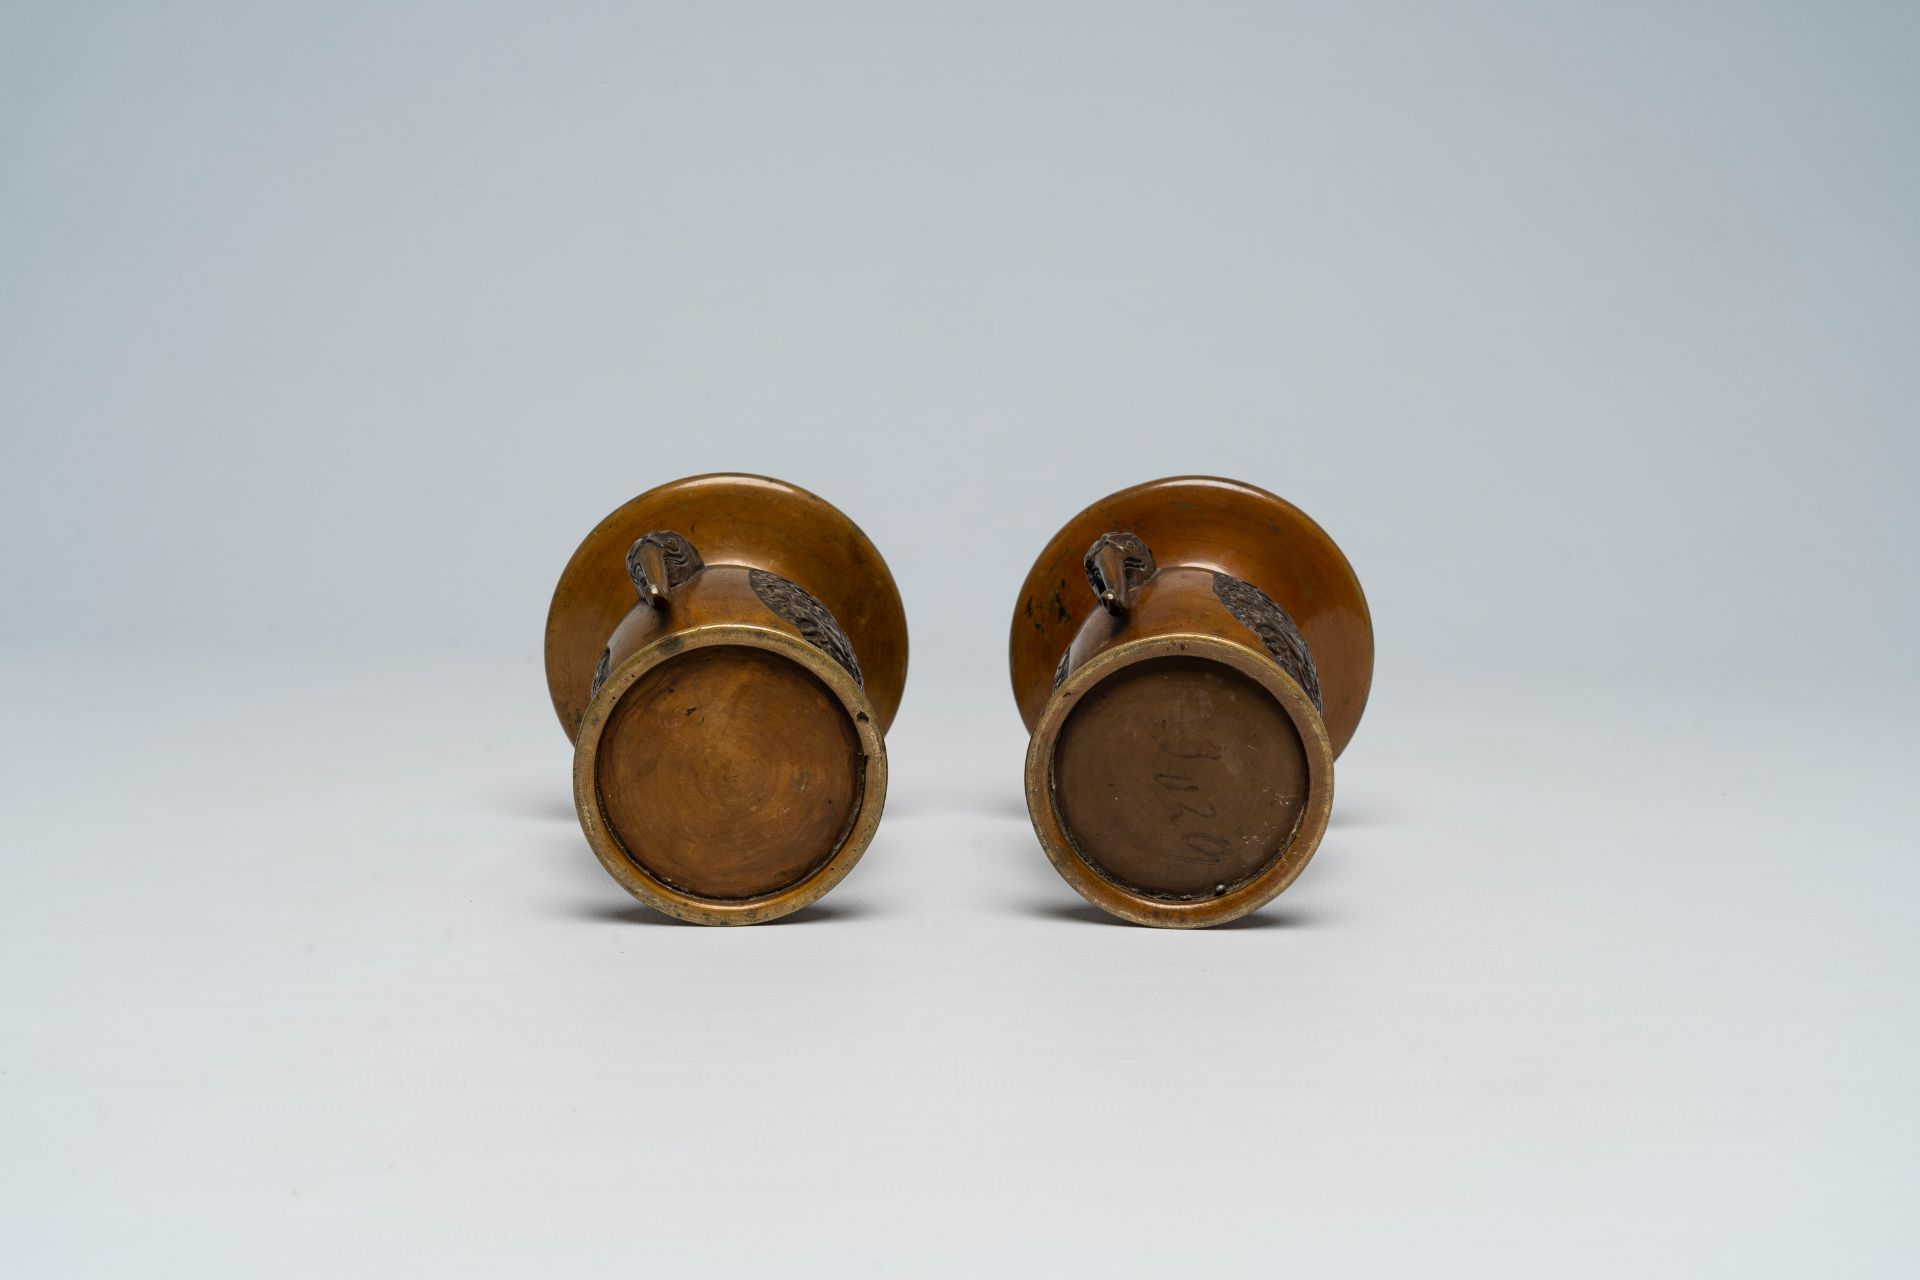 A pair of Japanese bronze vases, two mixed metal chargers with relief design, a blue and white dish - Image 21 of 21